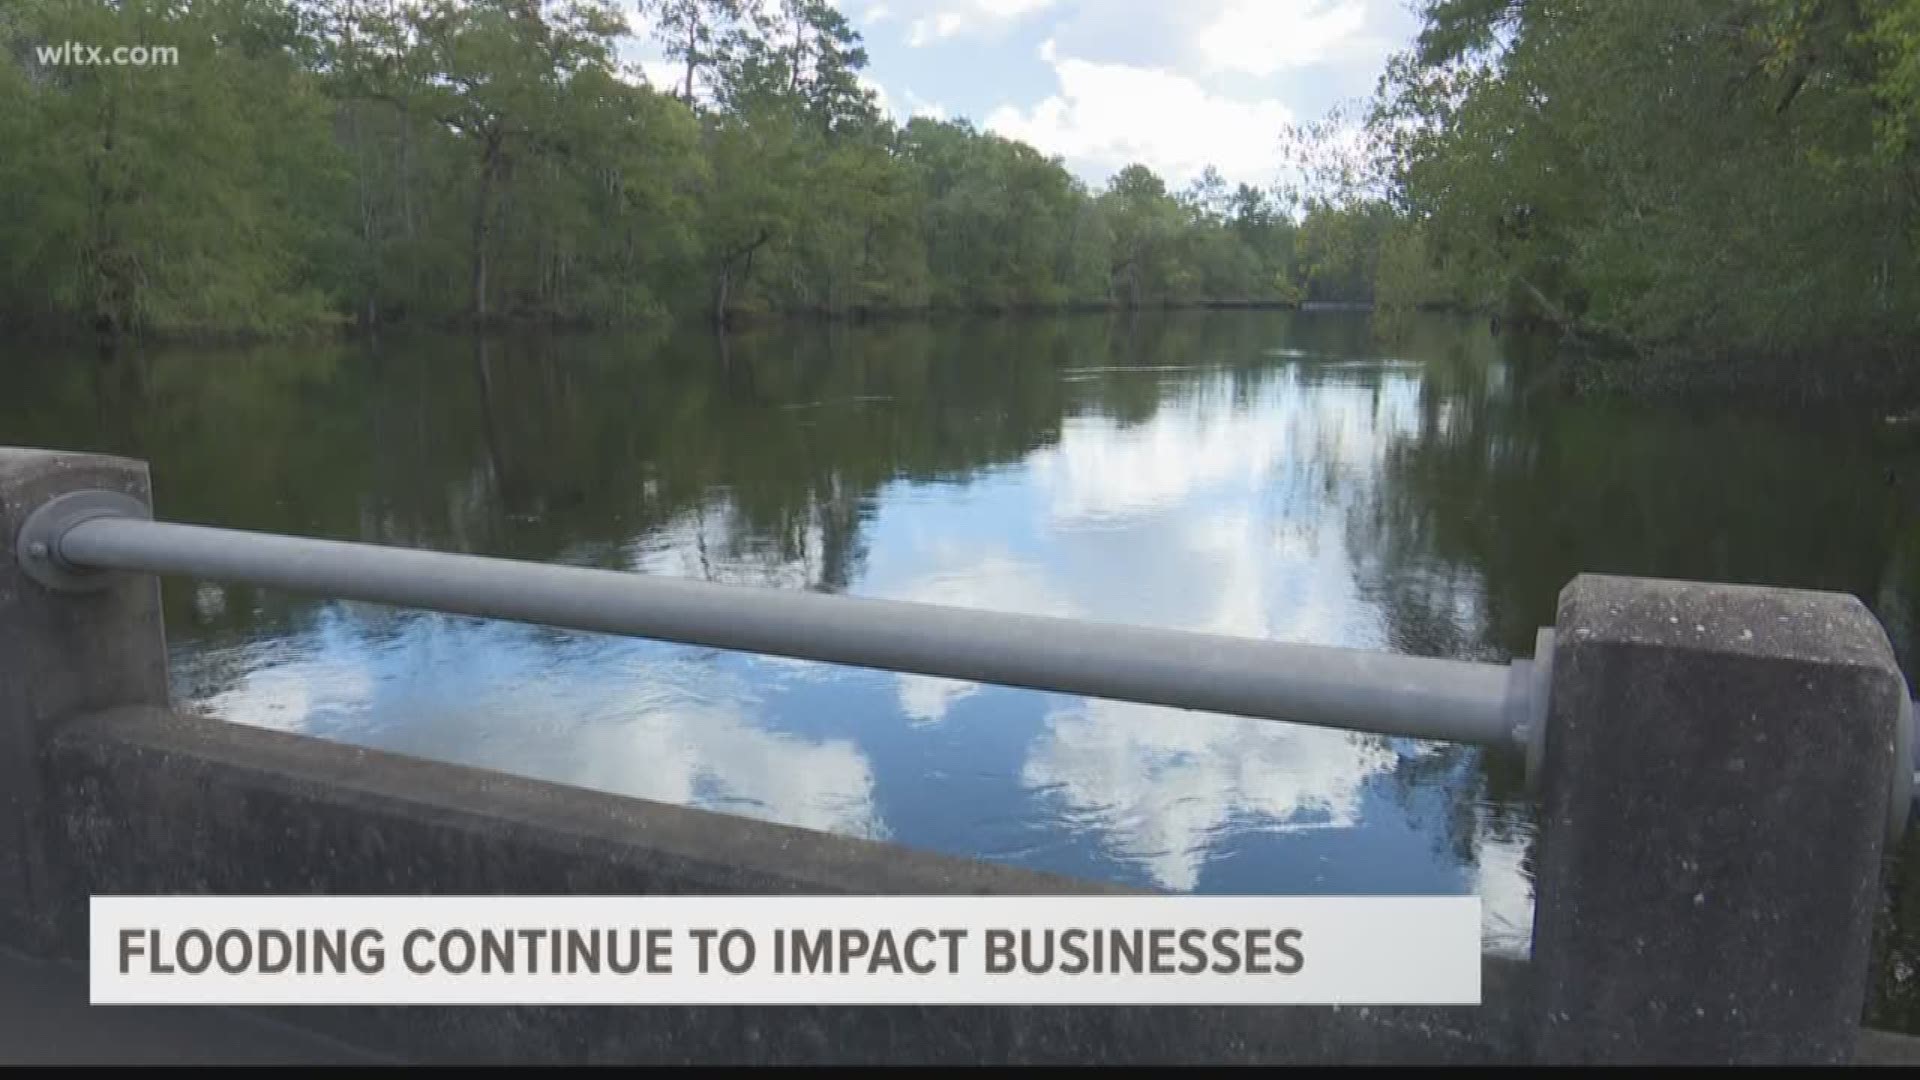 Flooding from Hurricane Florence is still creating flooding in the Conway area